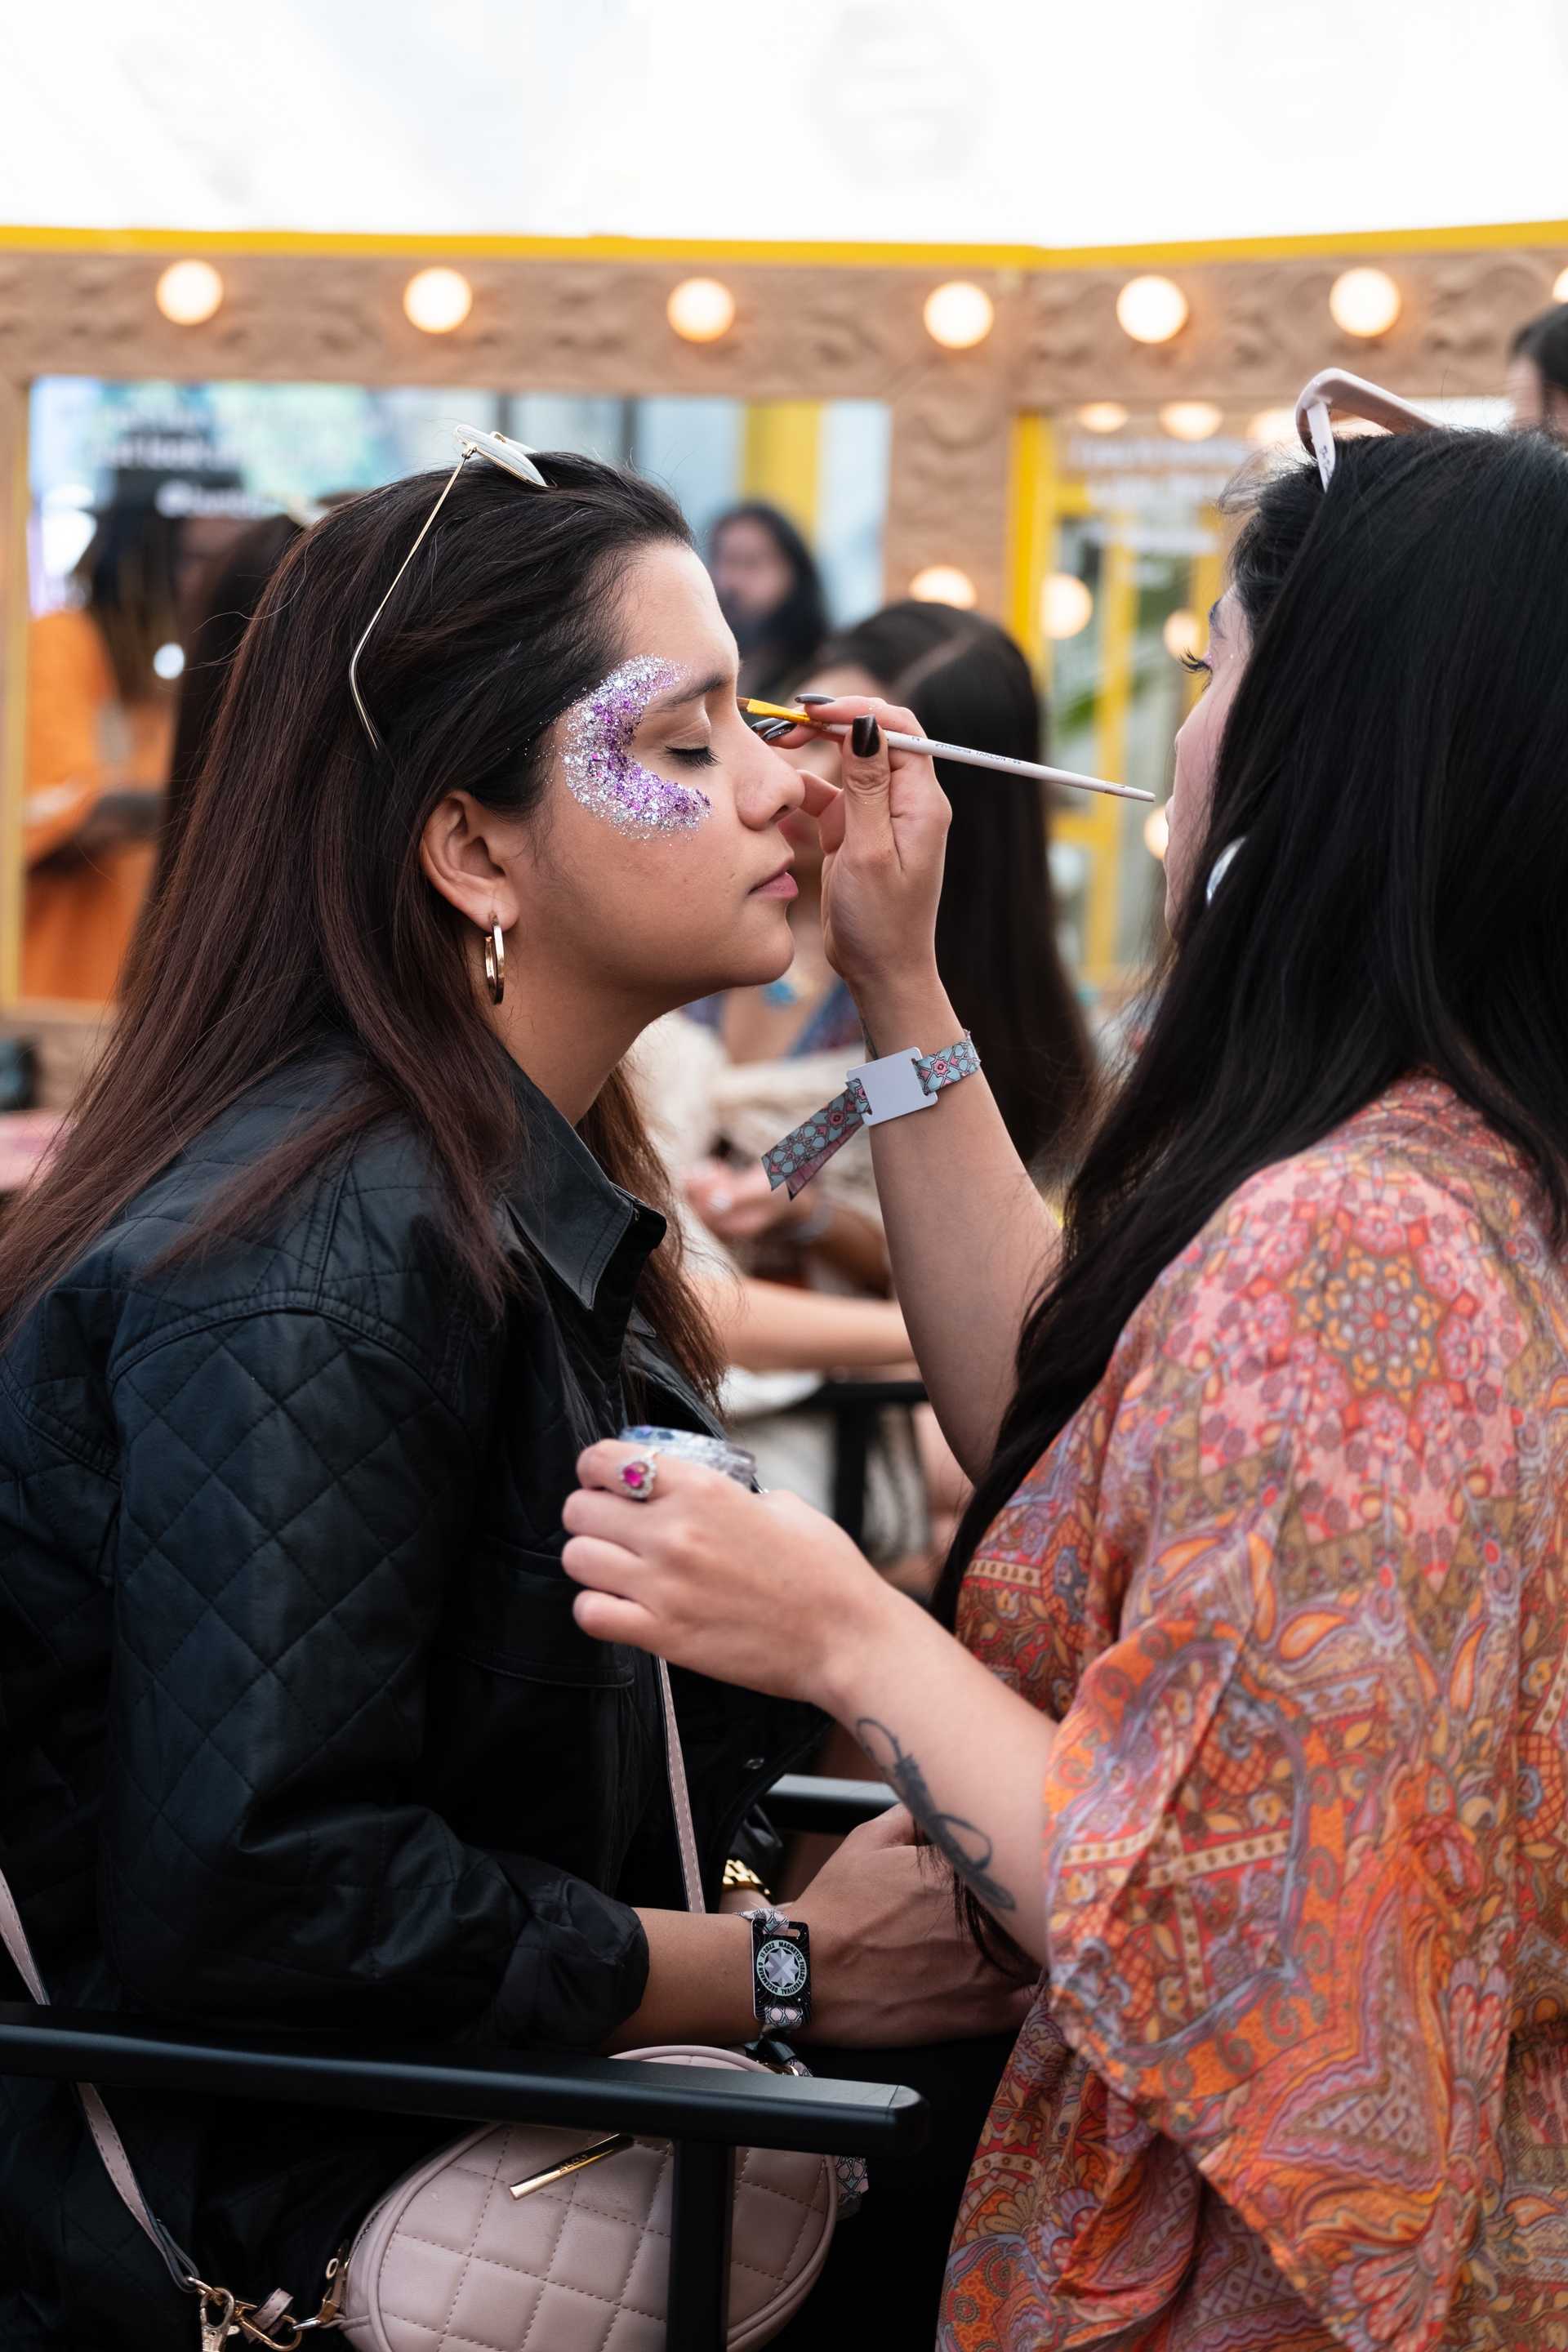 An attendee gets festival ready at Bumble Hive - Imgae credit - Aarohi Mishra